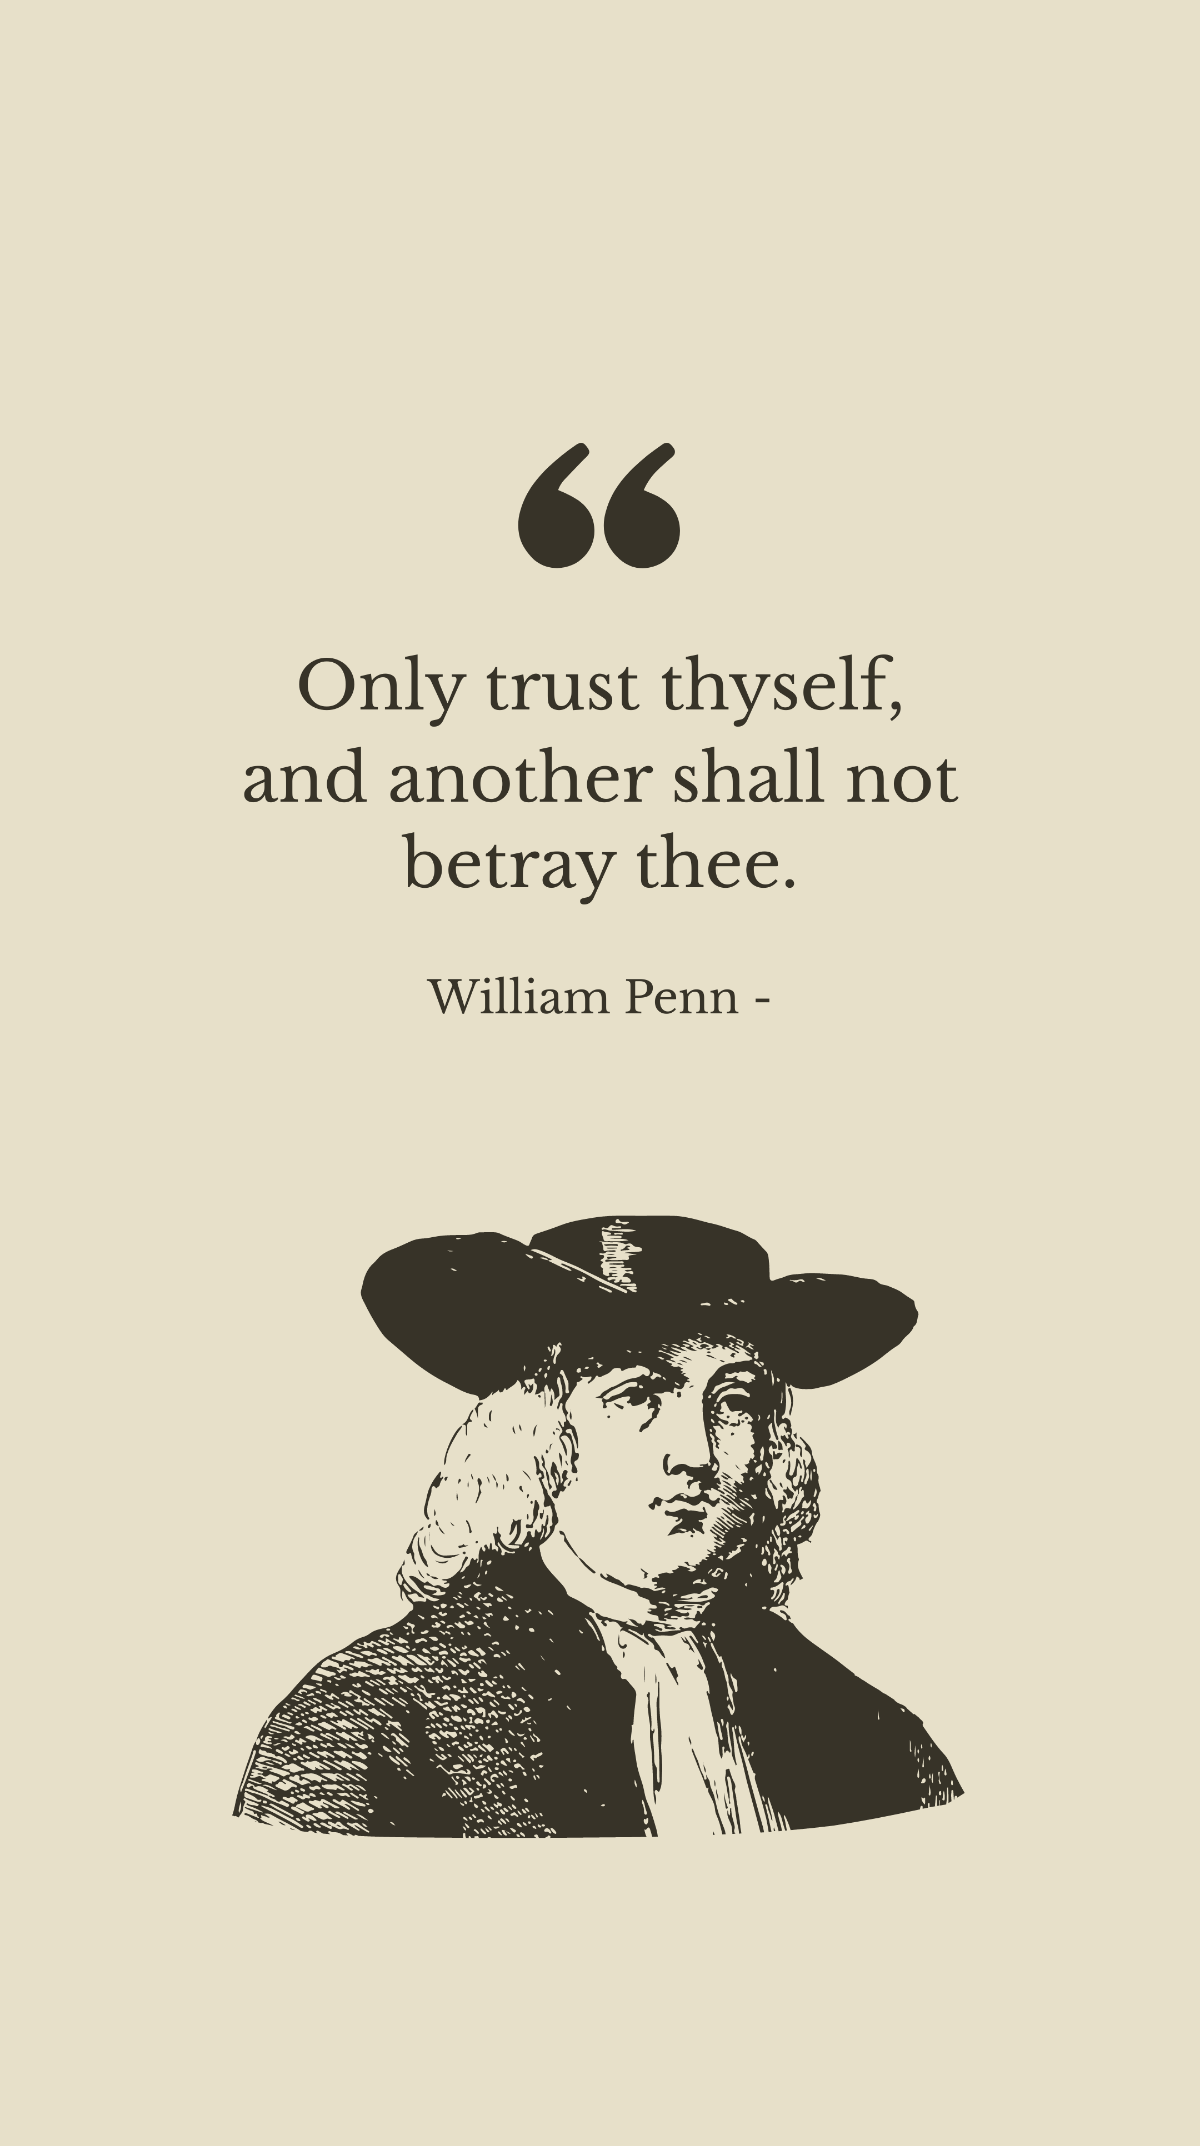 William Penn - Only trust thyself, and another shall not betray thee. Template